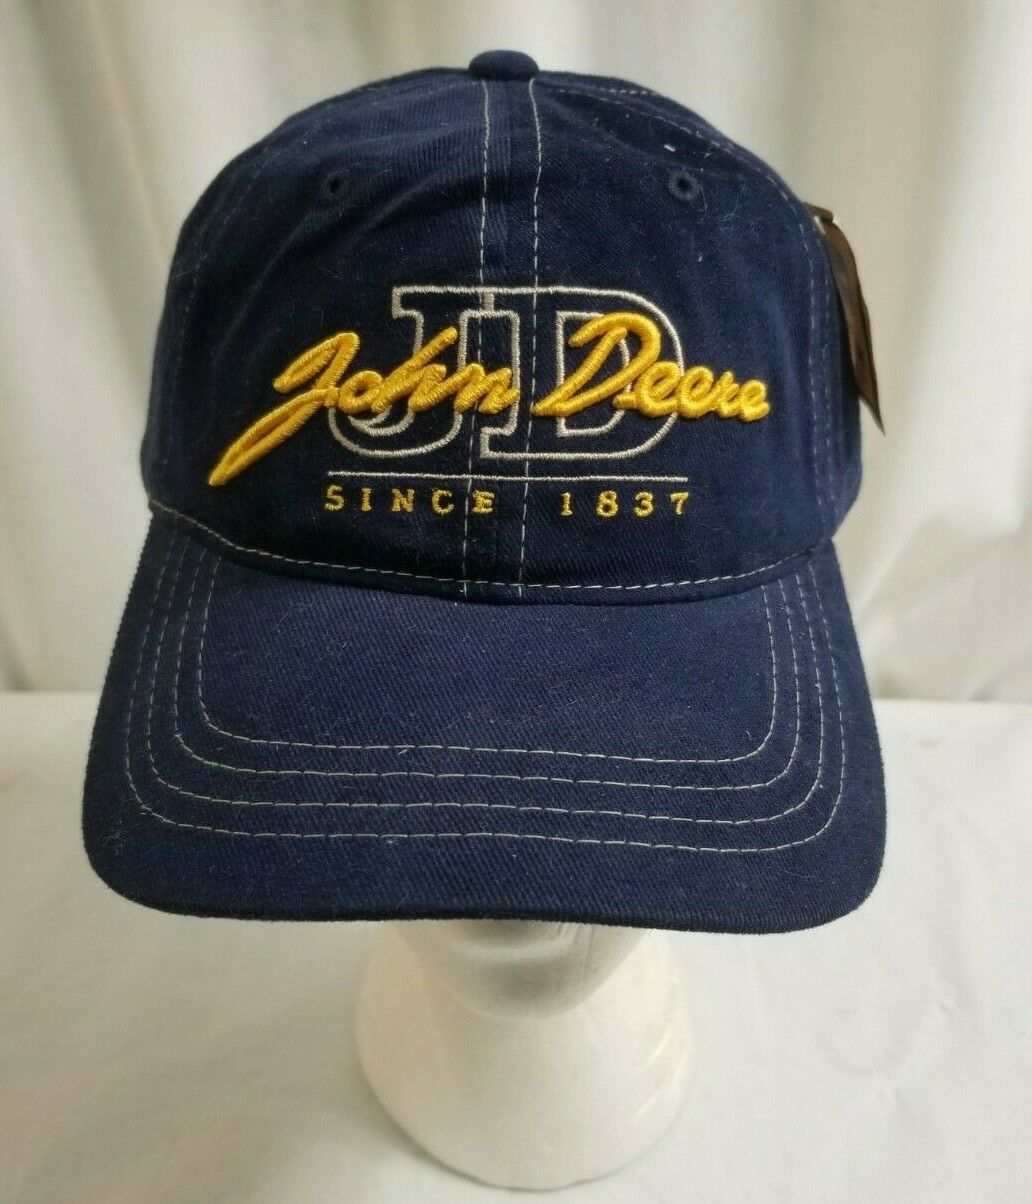 Nos Mpc Blue W Yellow Writing Adjustable John Deere Hat Since 1837 New